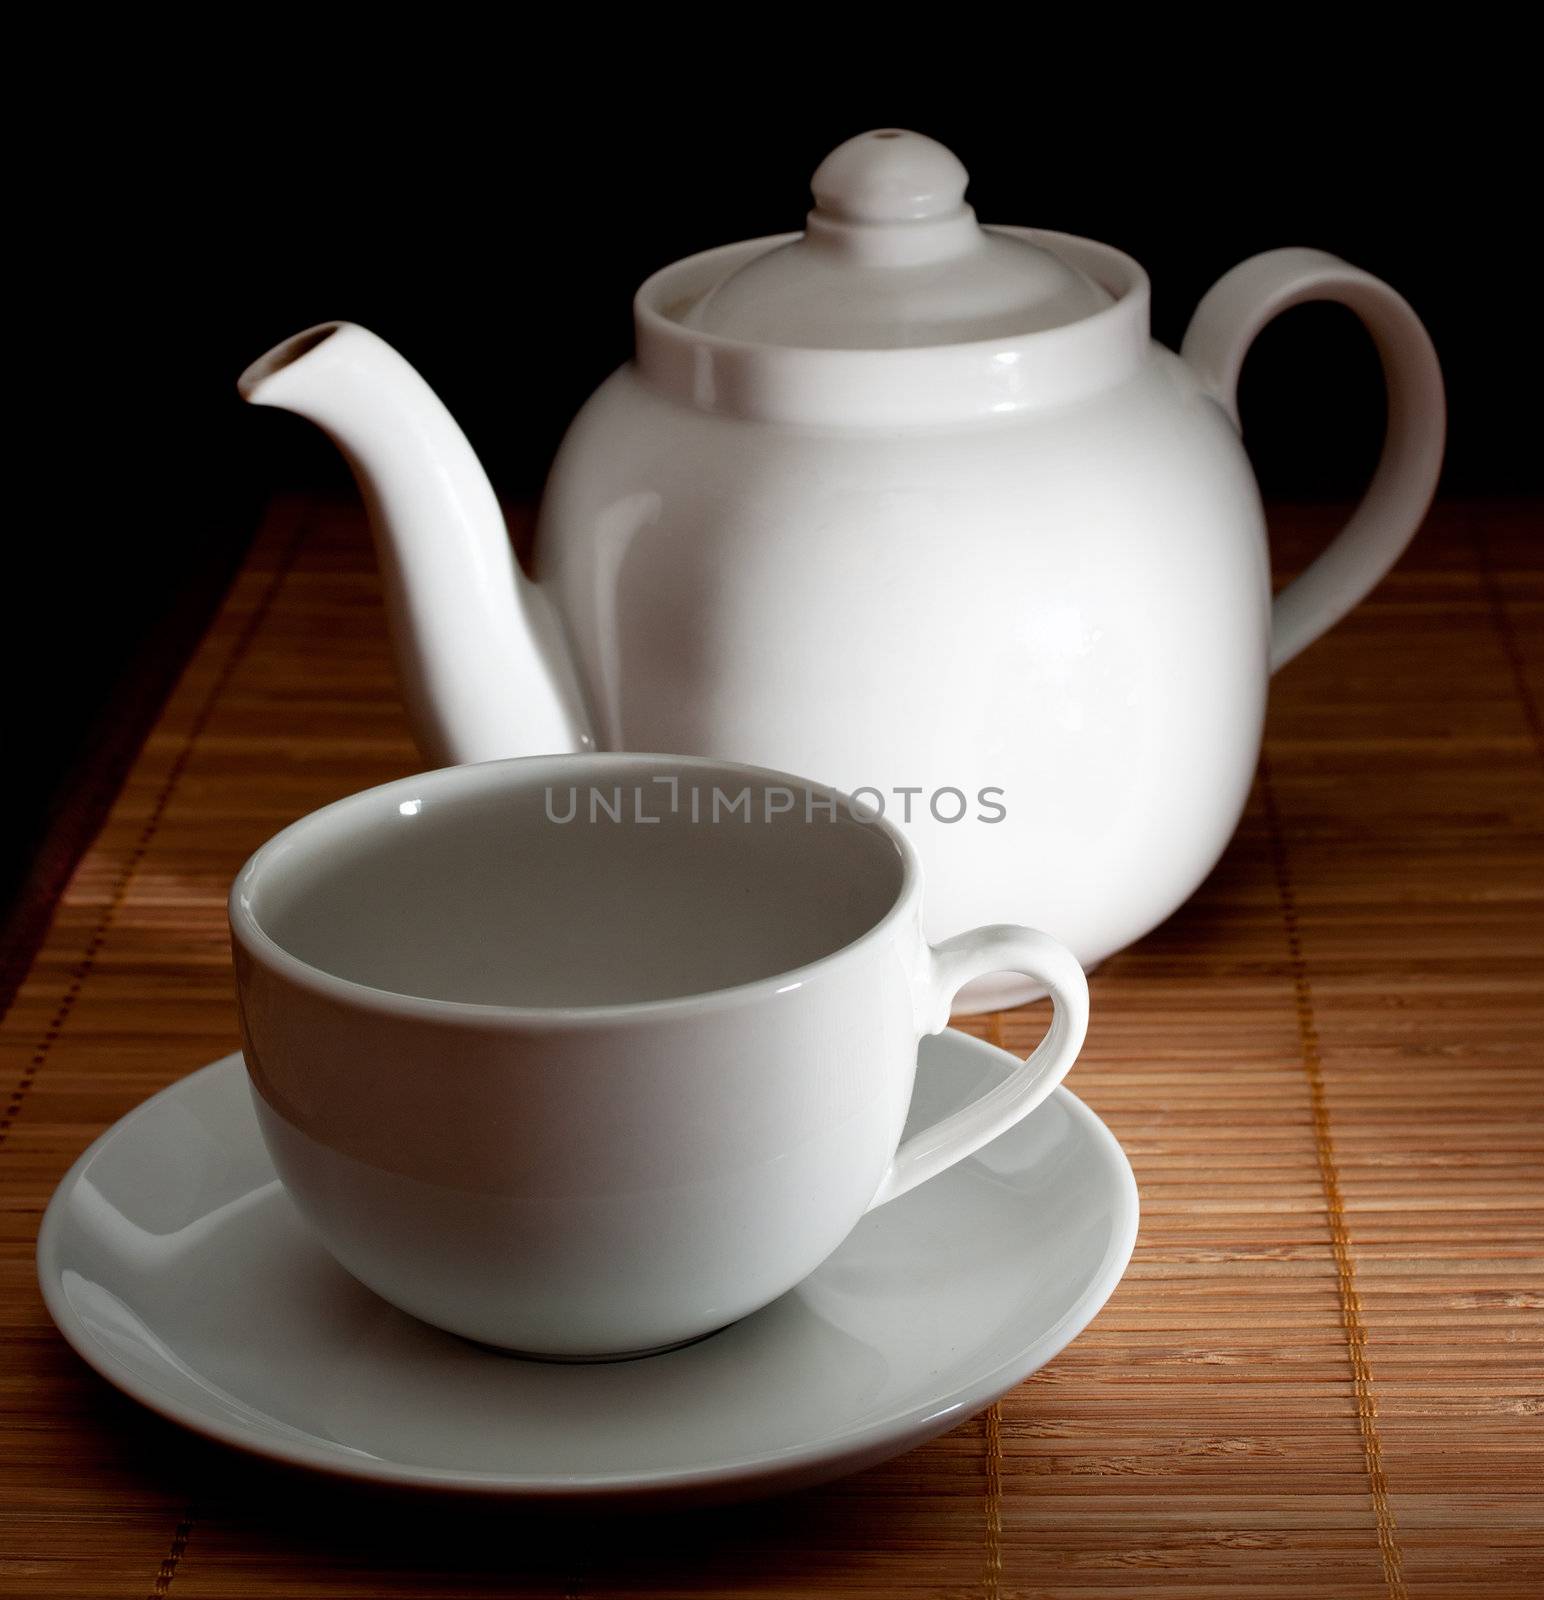 Tea and teapot by rbv